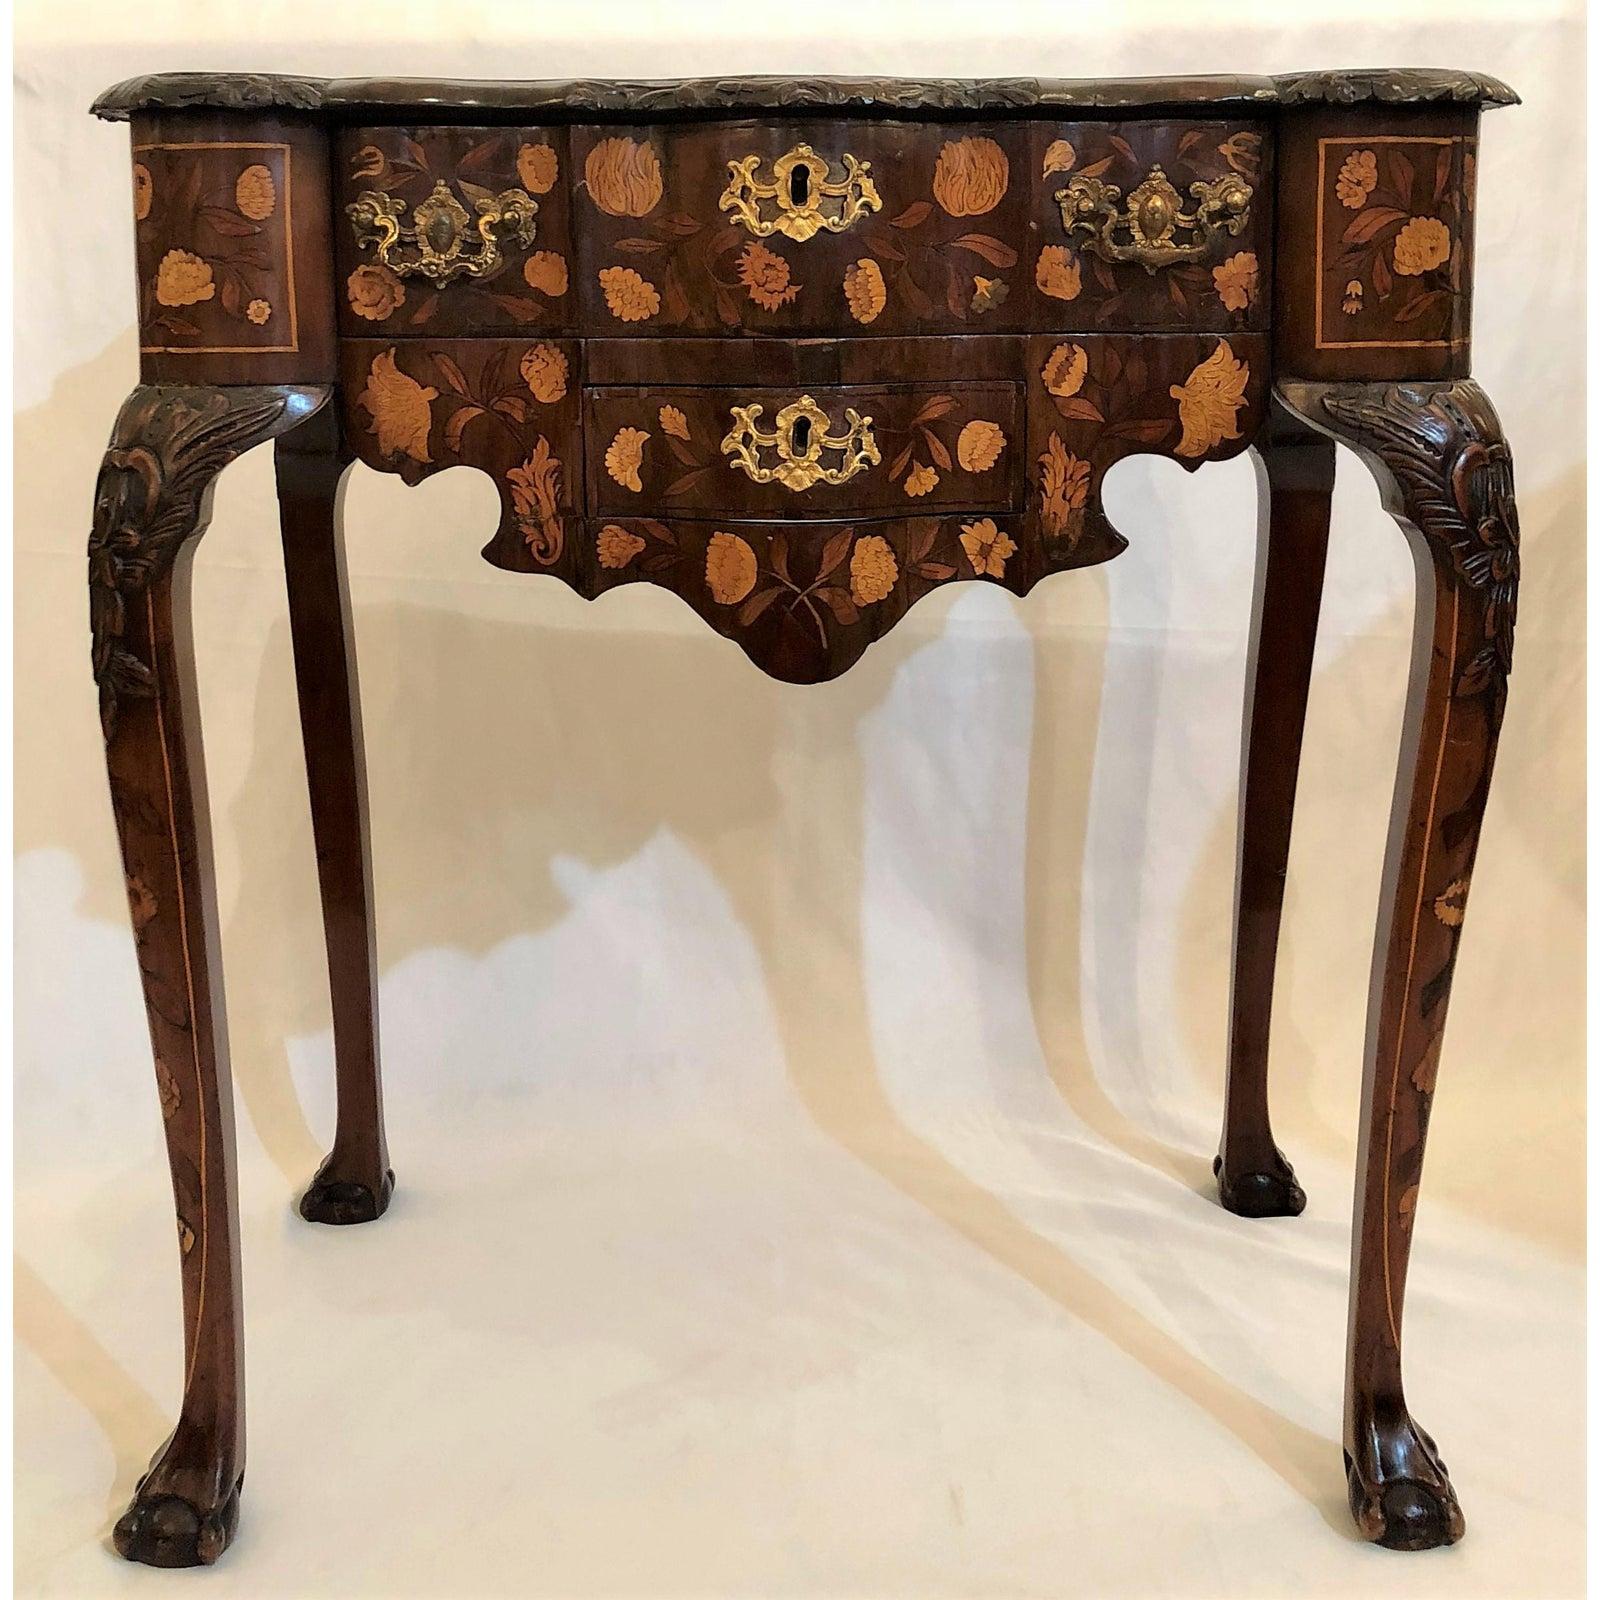 This is an amazing table with exceptional marquetry and inlay. It's fantastic in the way it was made.
 